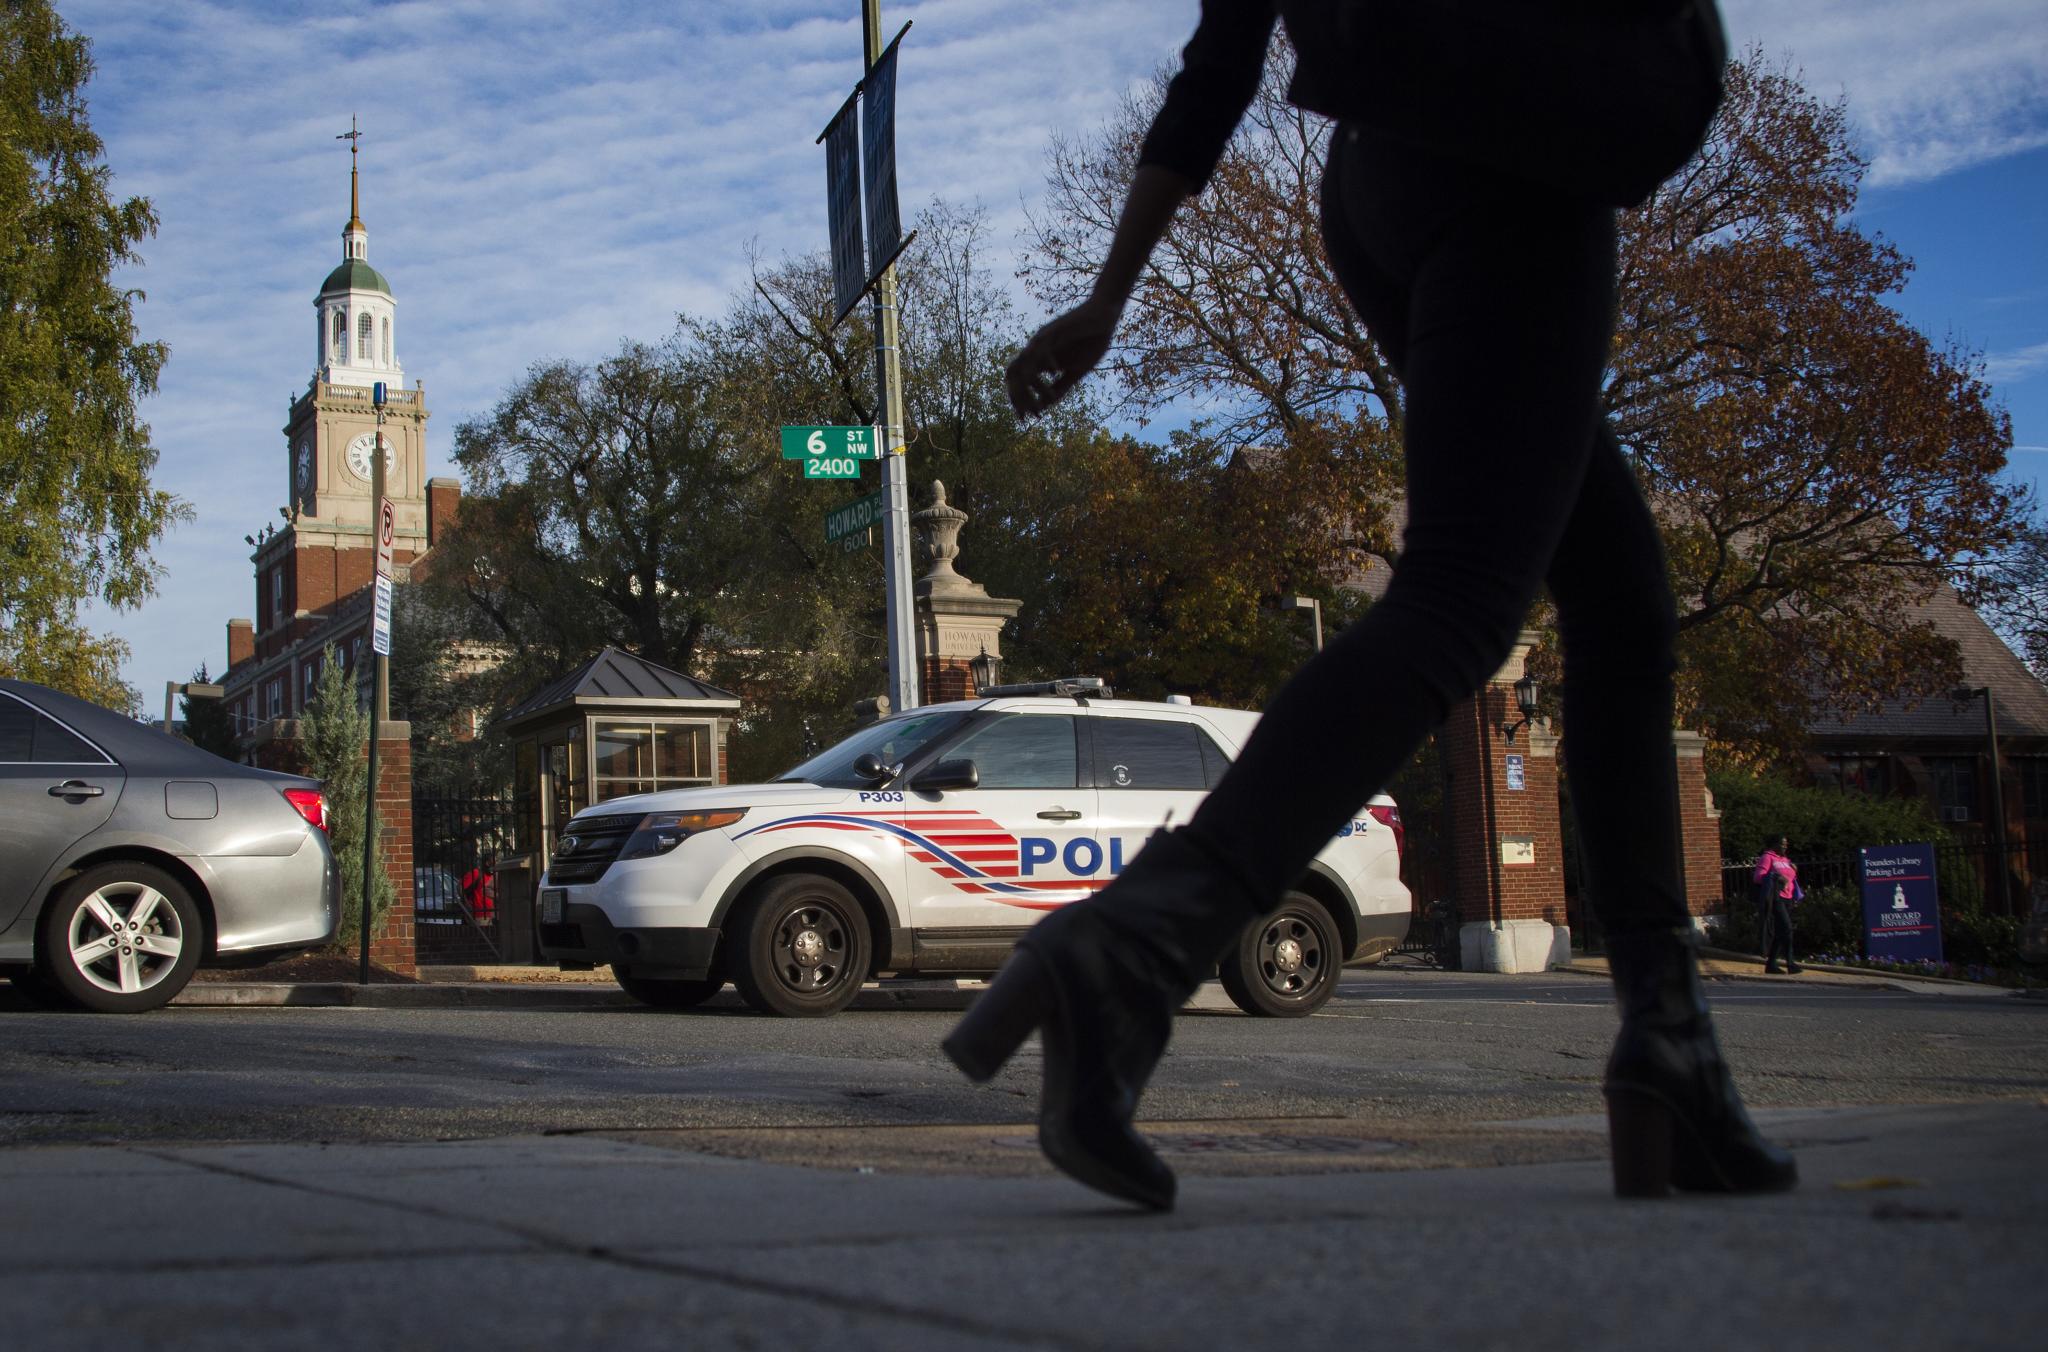 Howard University Tightens Security After an Anonymous User Posts Online Death Threats